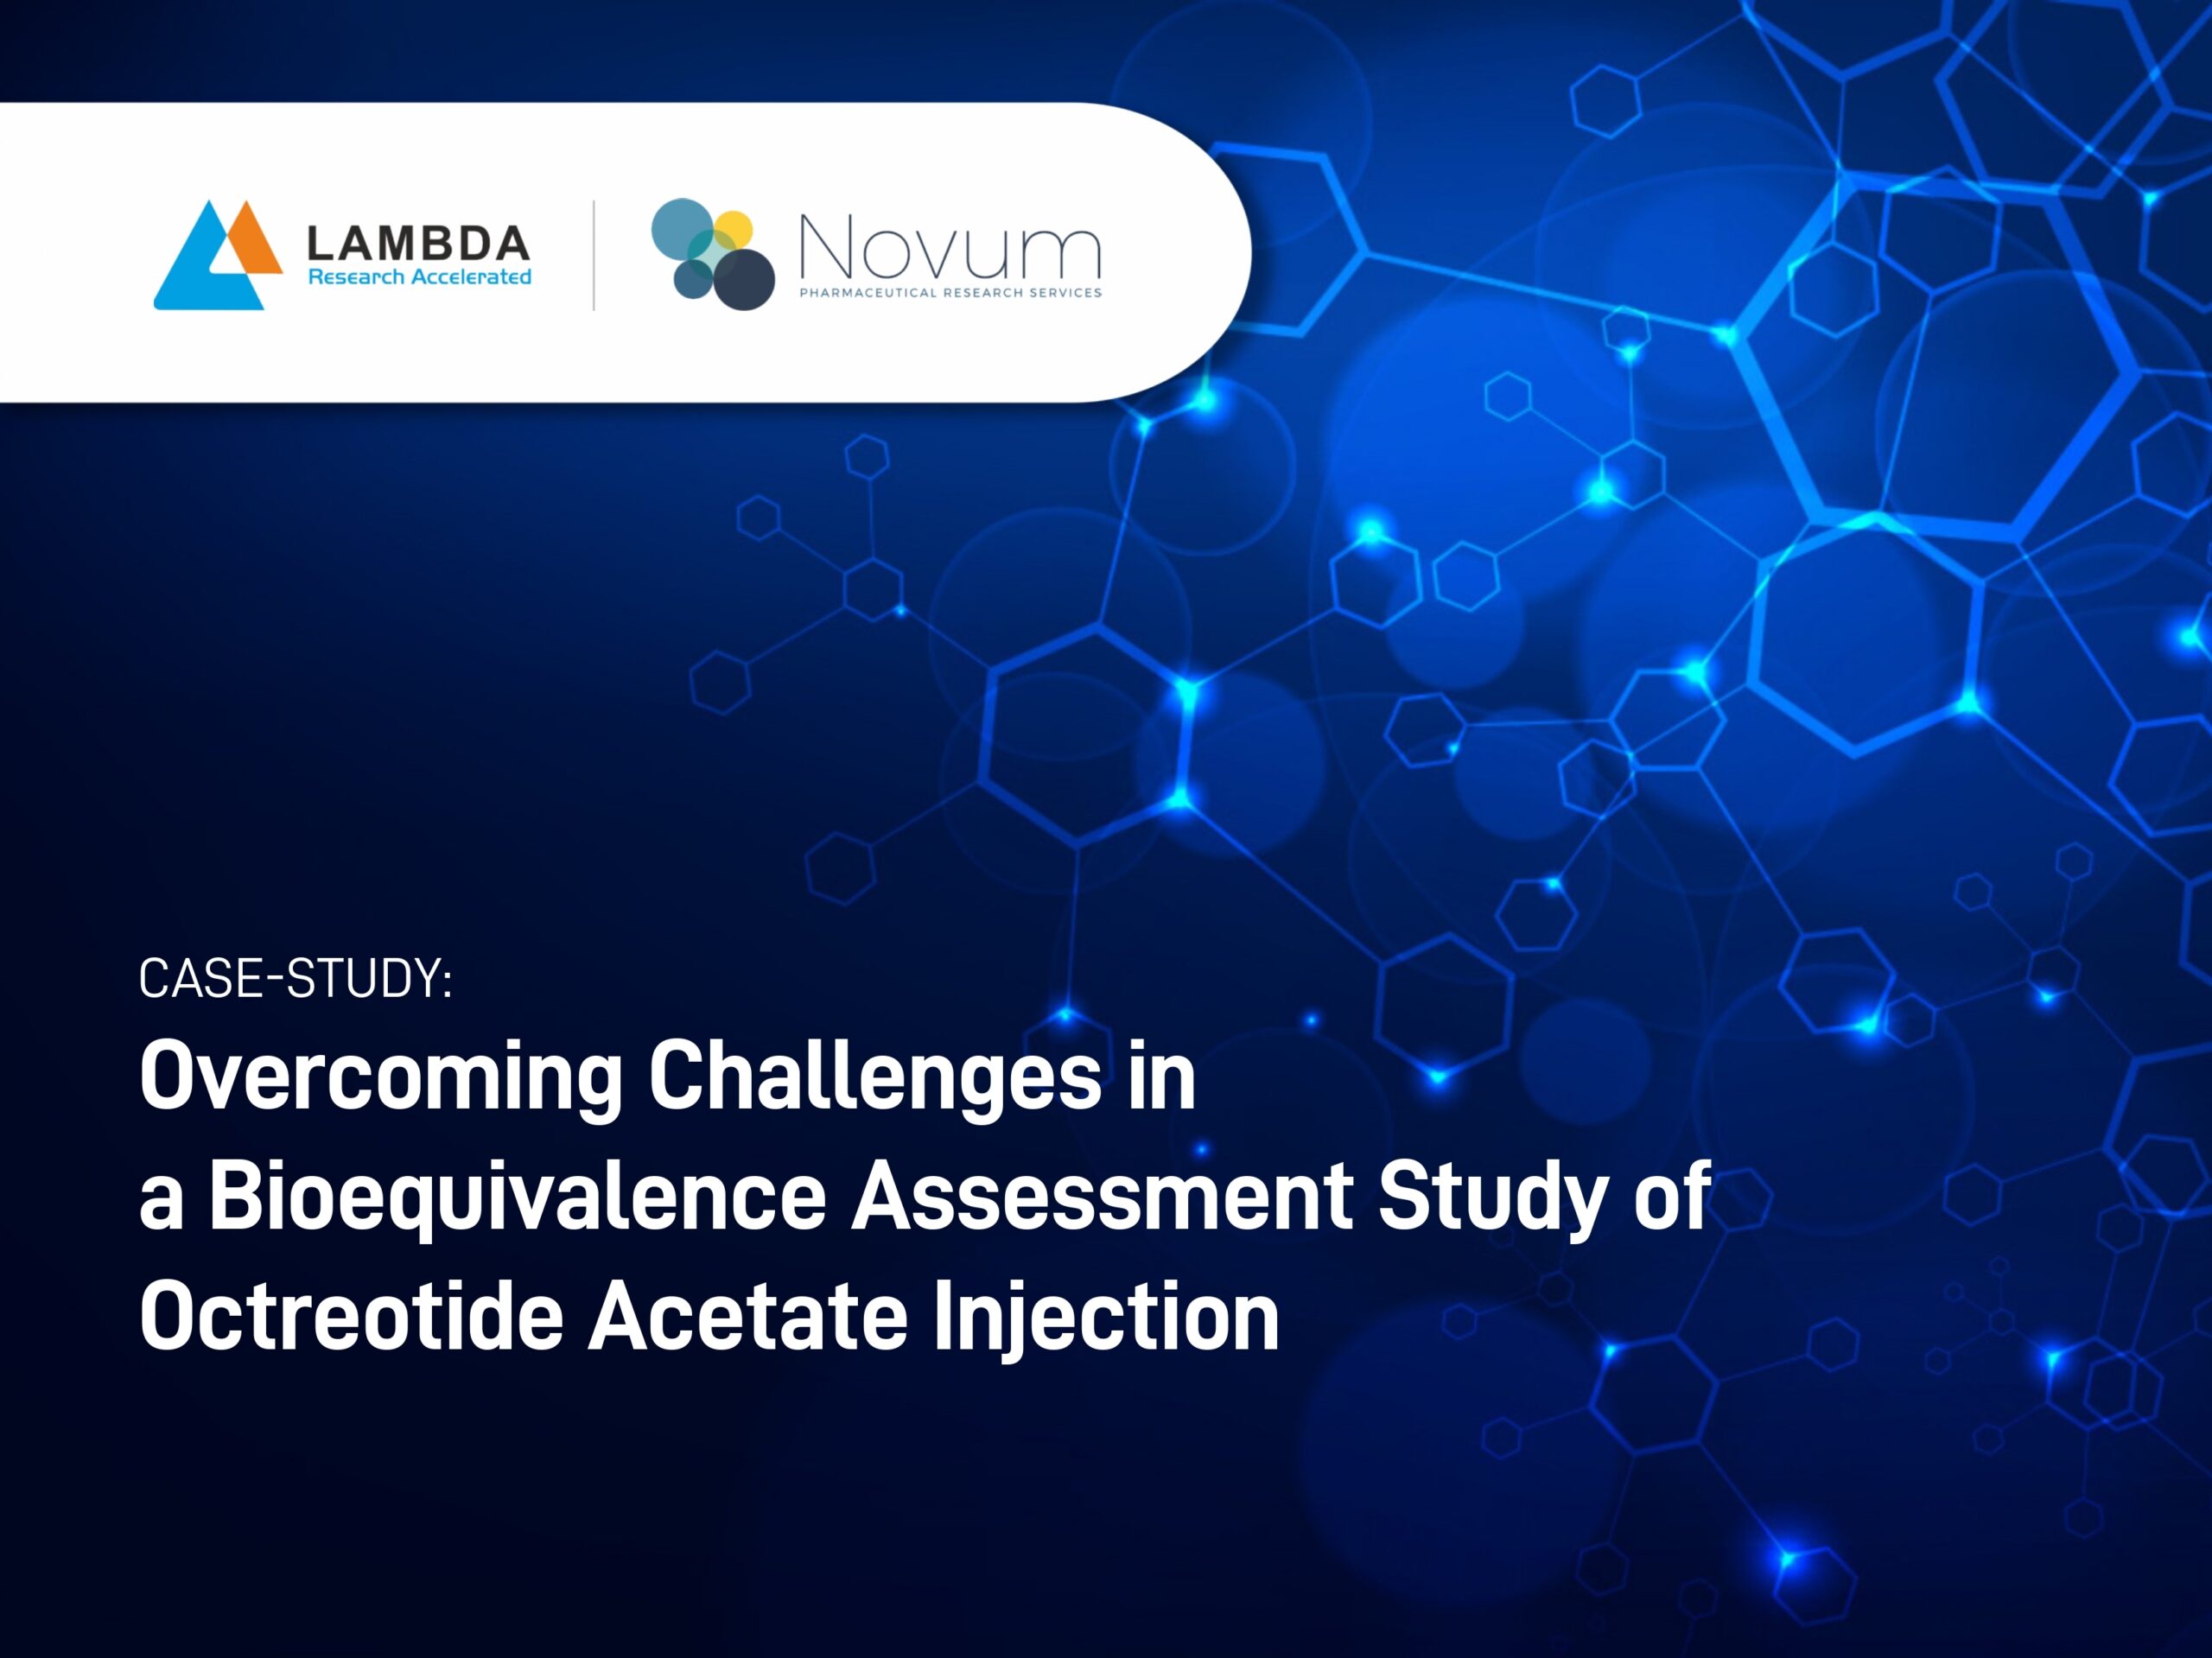 Overcoming Challenges ina Bioequivalence Assessment Study of Octreotide Acetate Injection